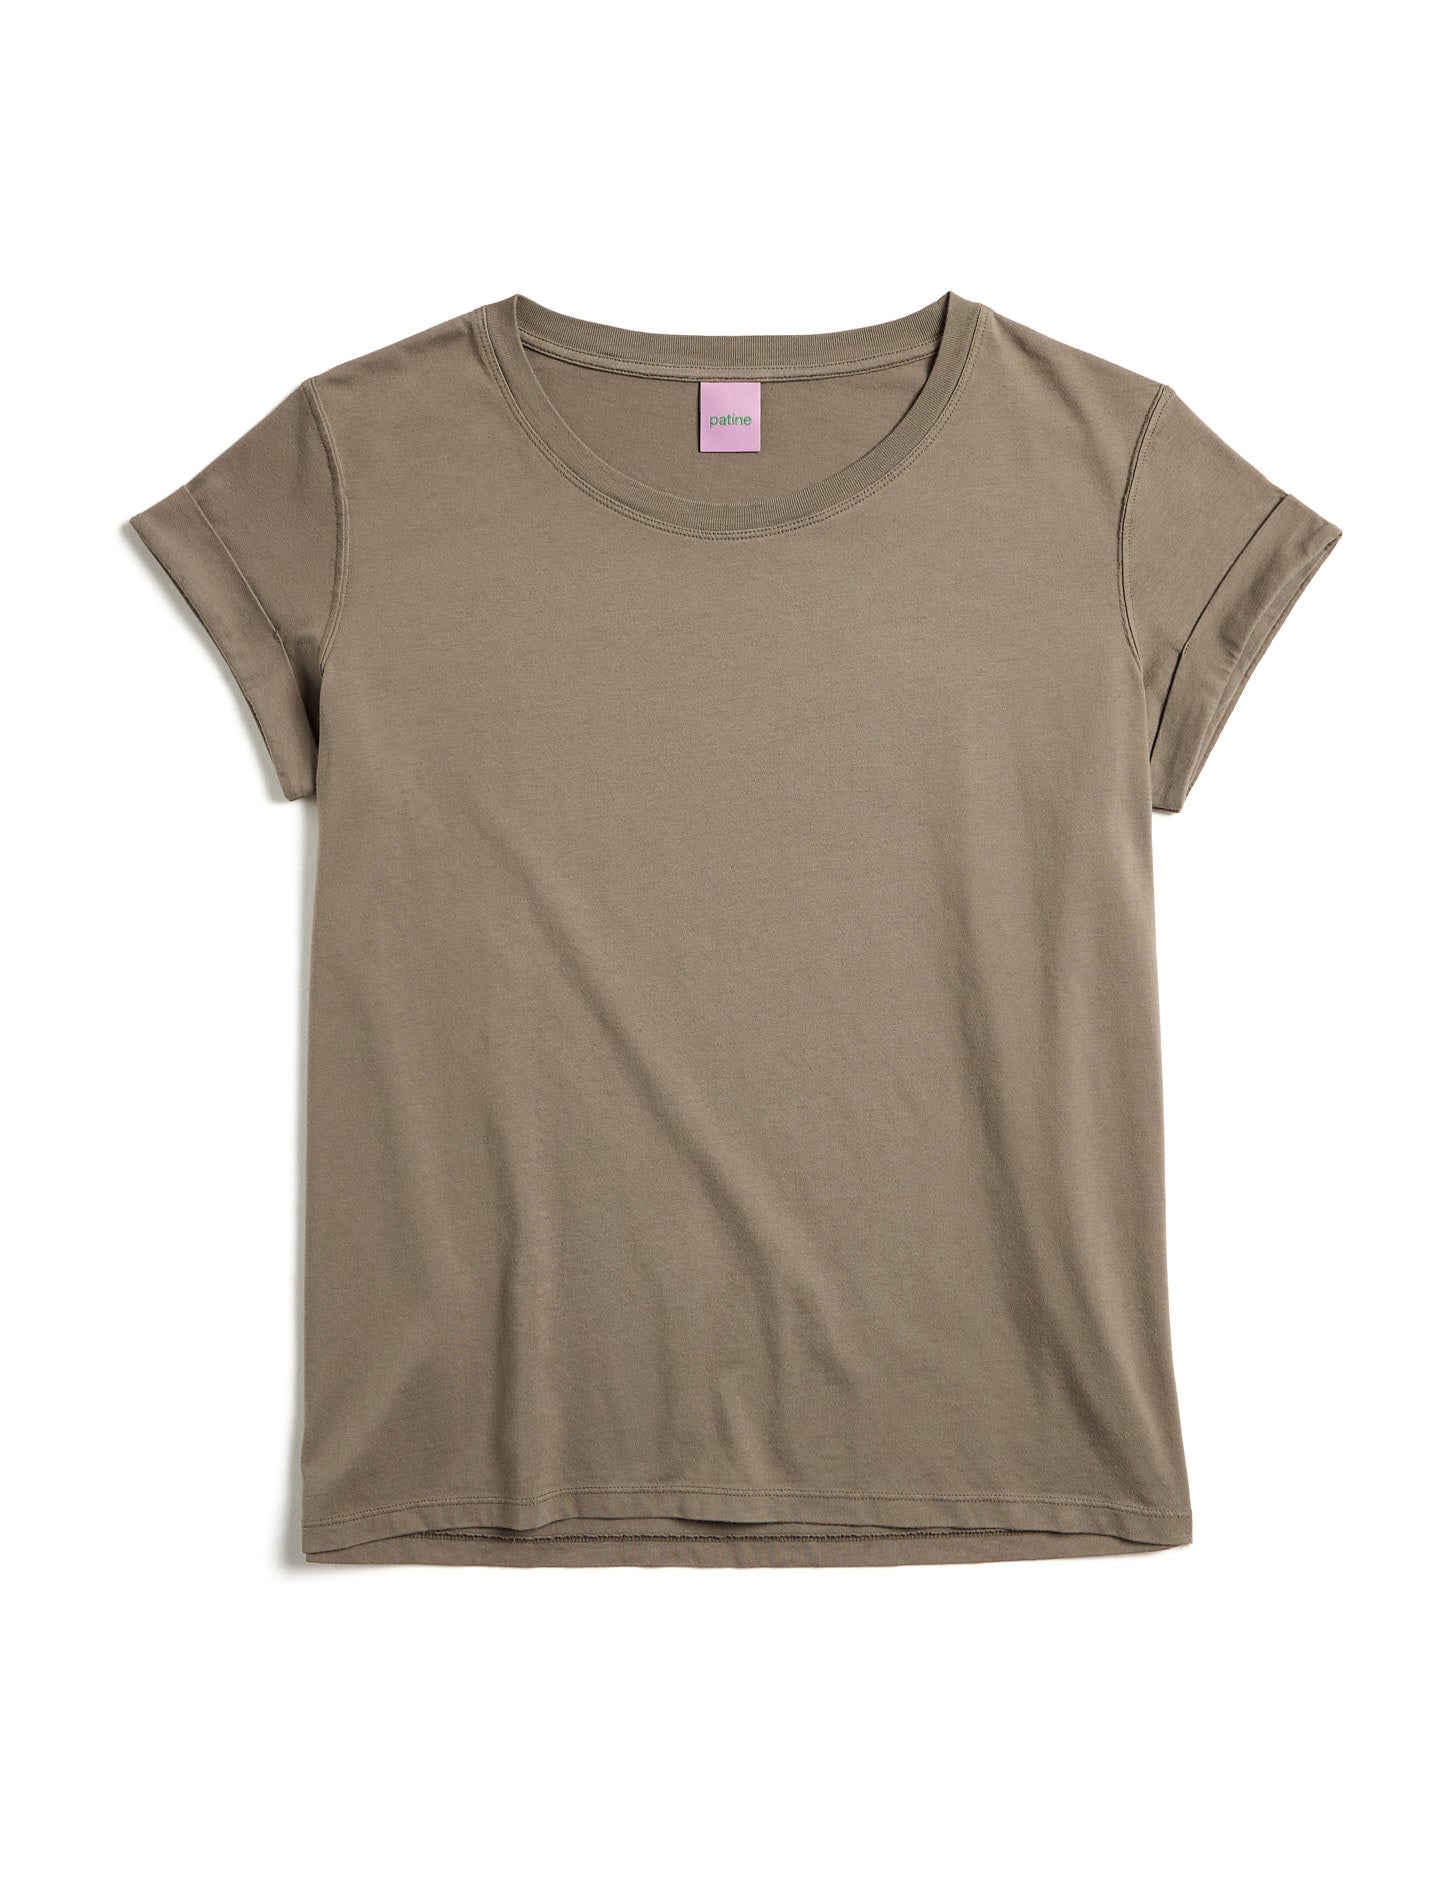 Le tee-shirt Cool Willie® jersey bio-recyclé Dark olive